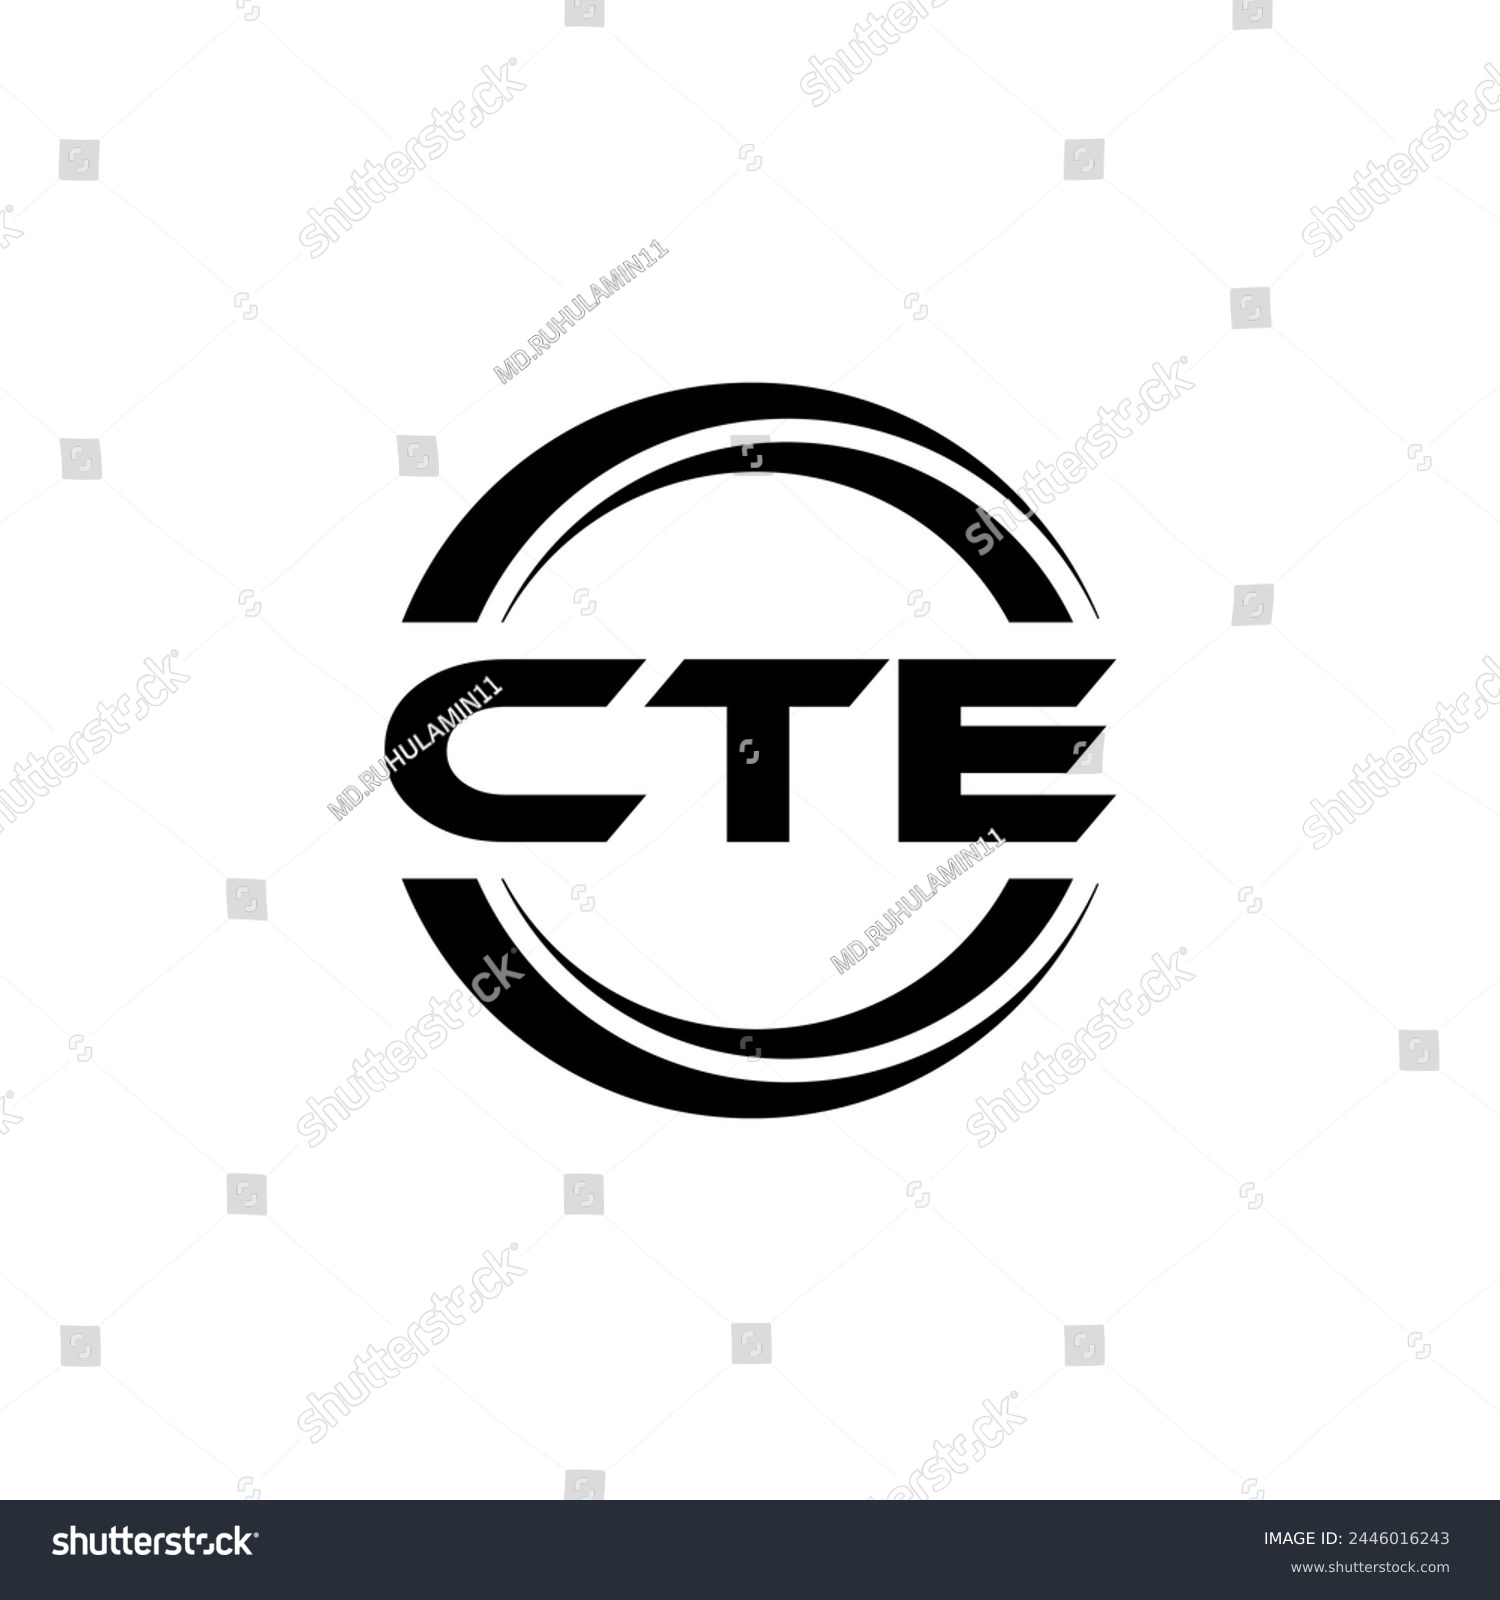 SVG of CTE Letter Logo Design, Inspiration for a Unique Identity. Modern Elegance and Creative Design. Watermark Your Success with the Striking this Logo. svg